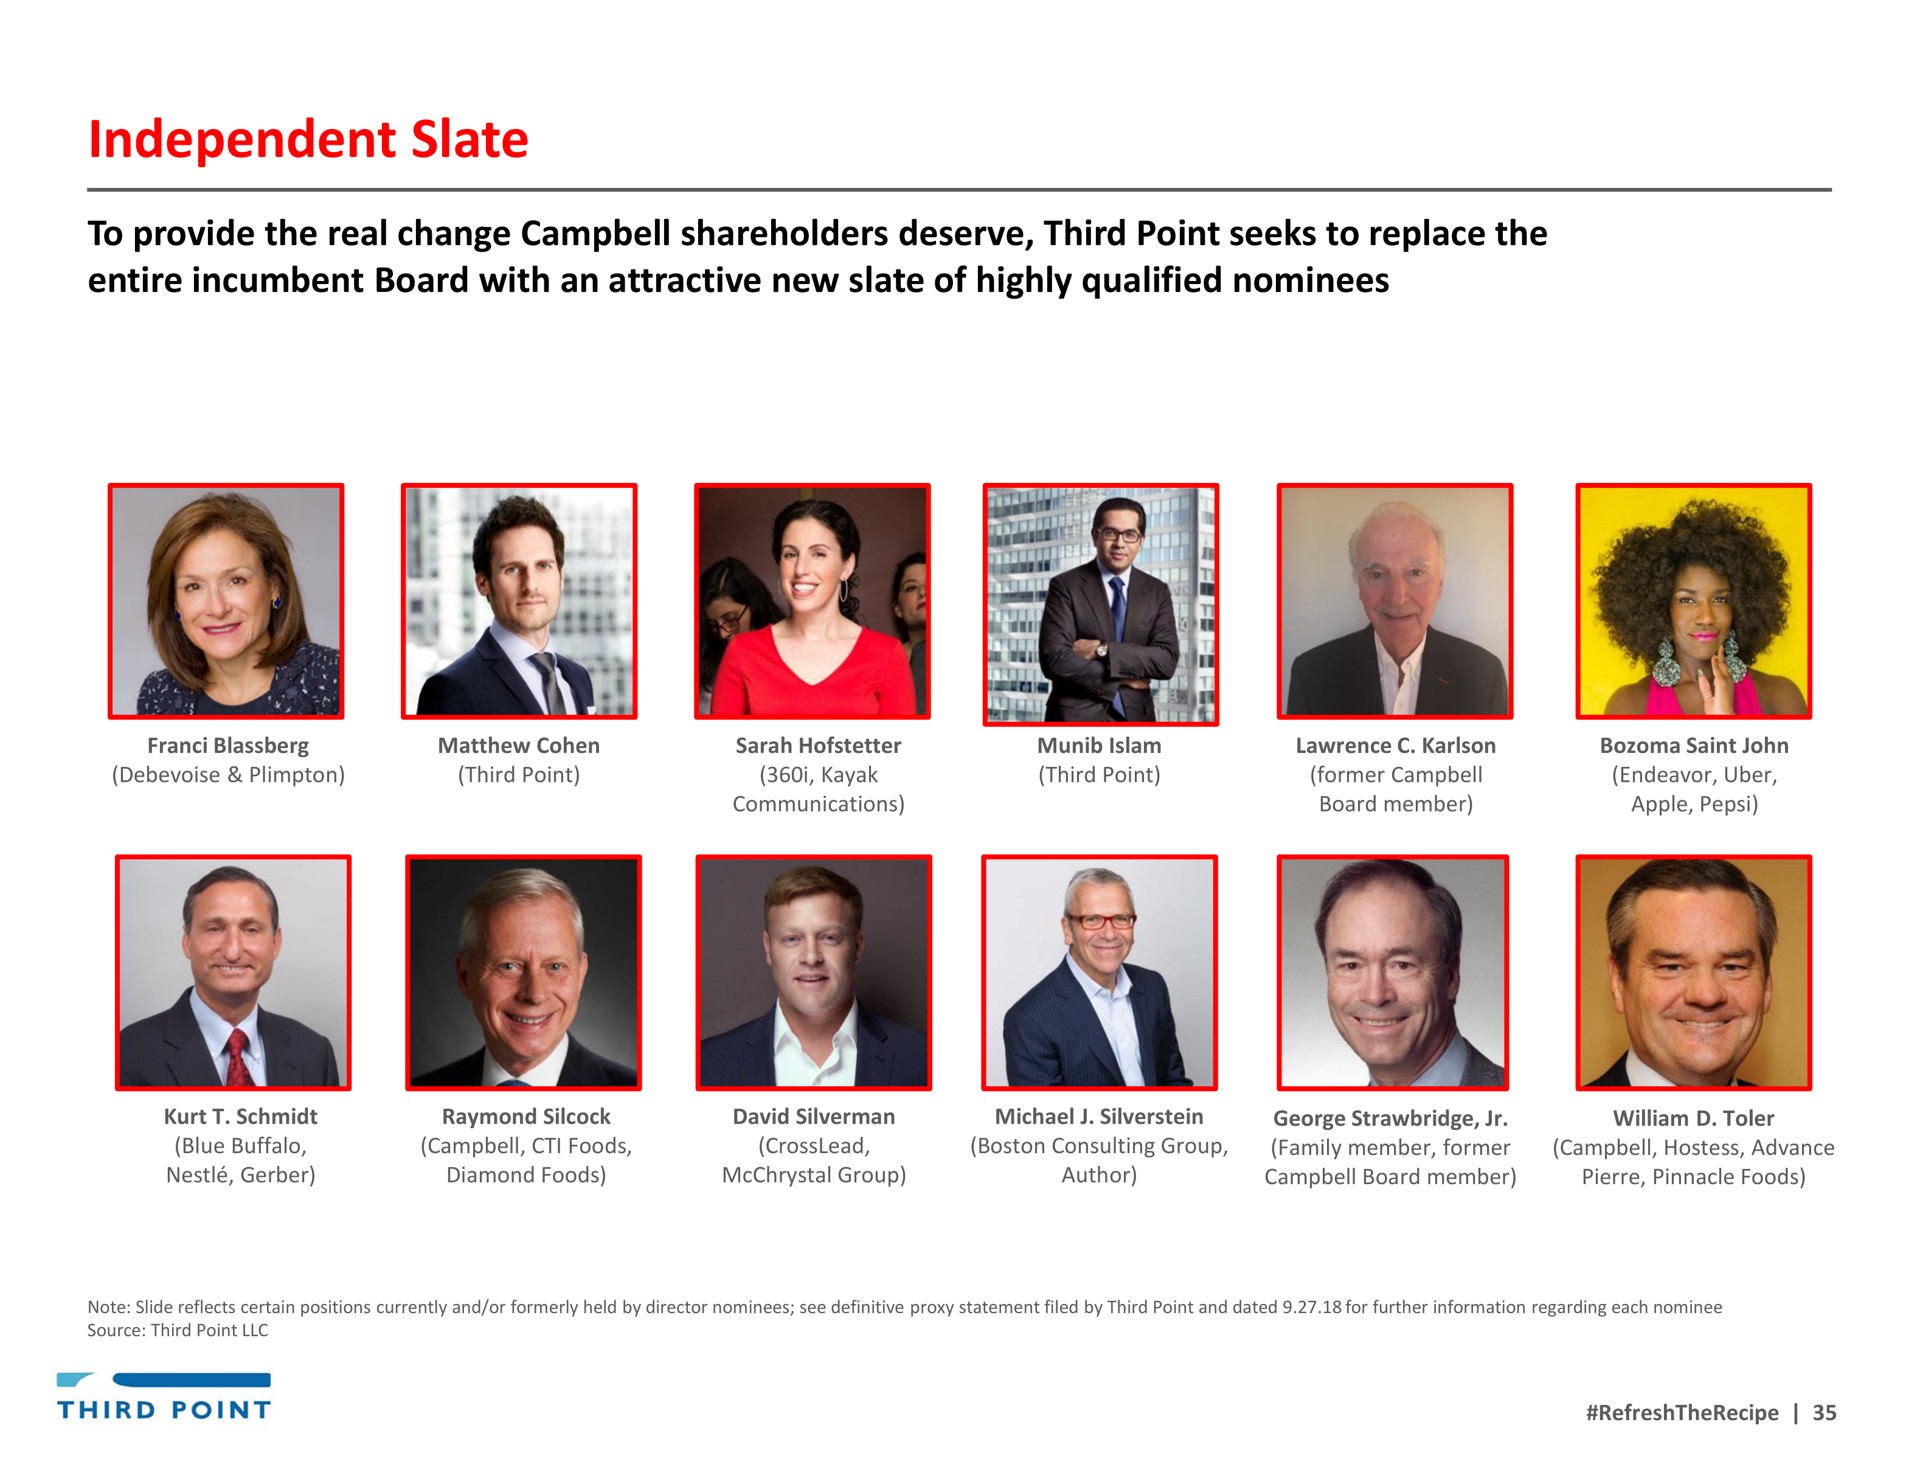 independent slate | Third Point Management